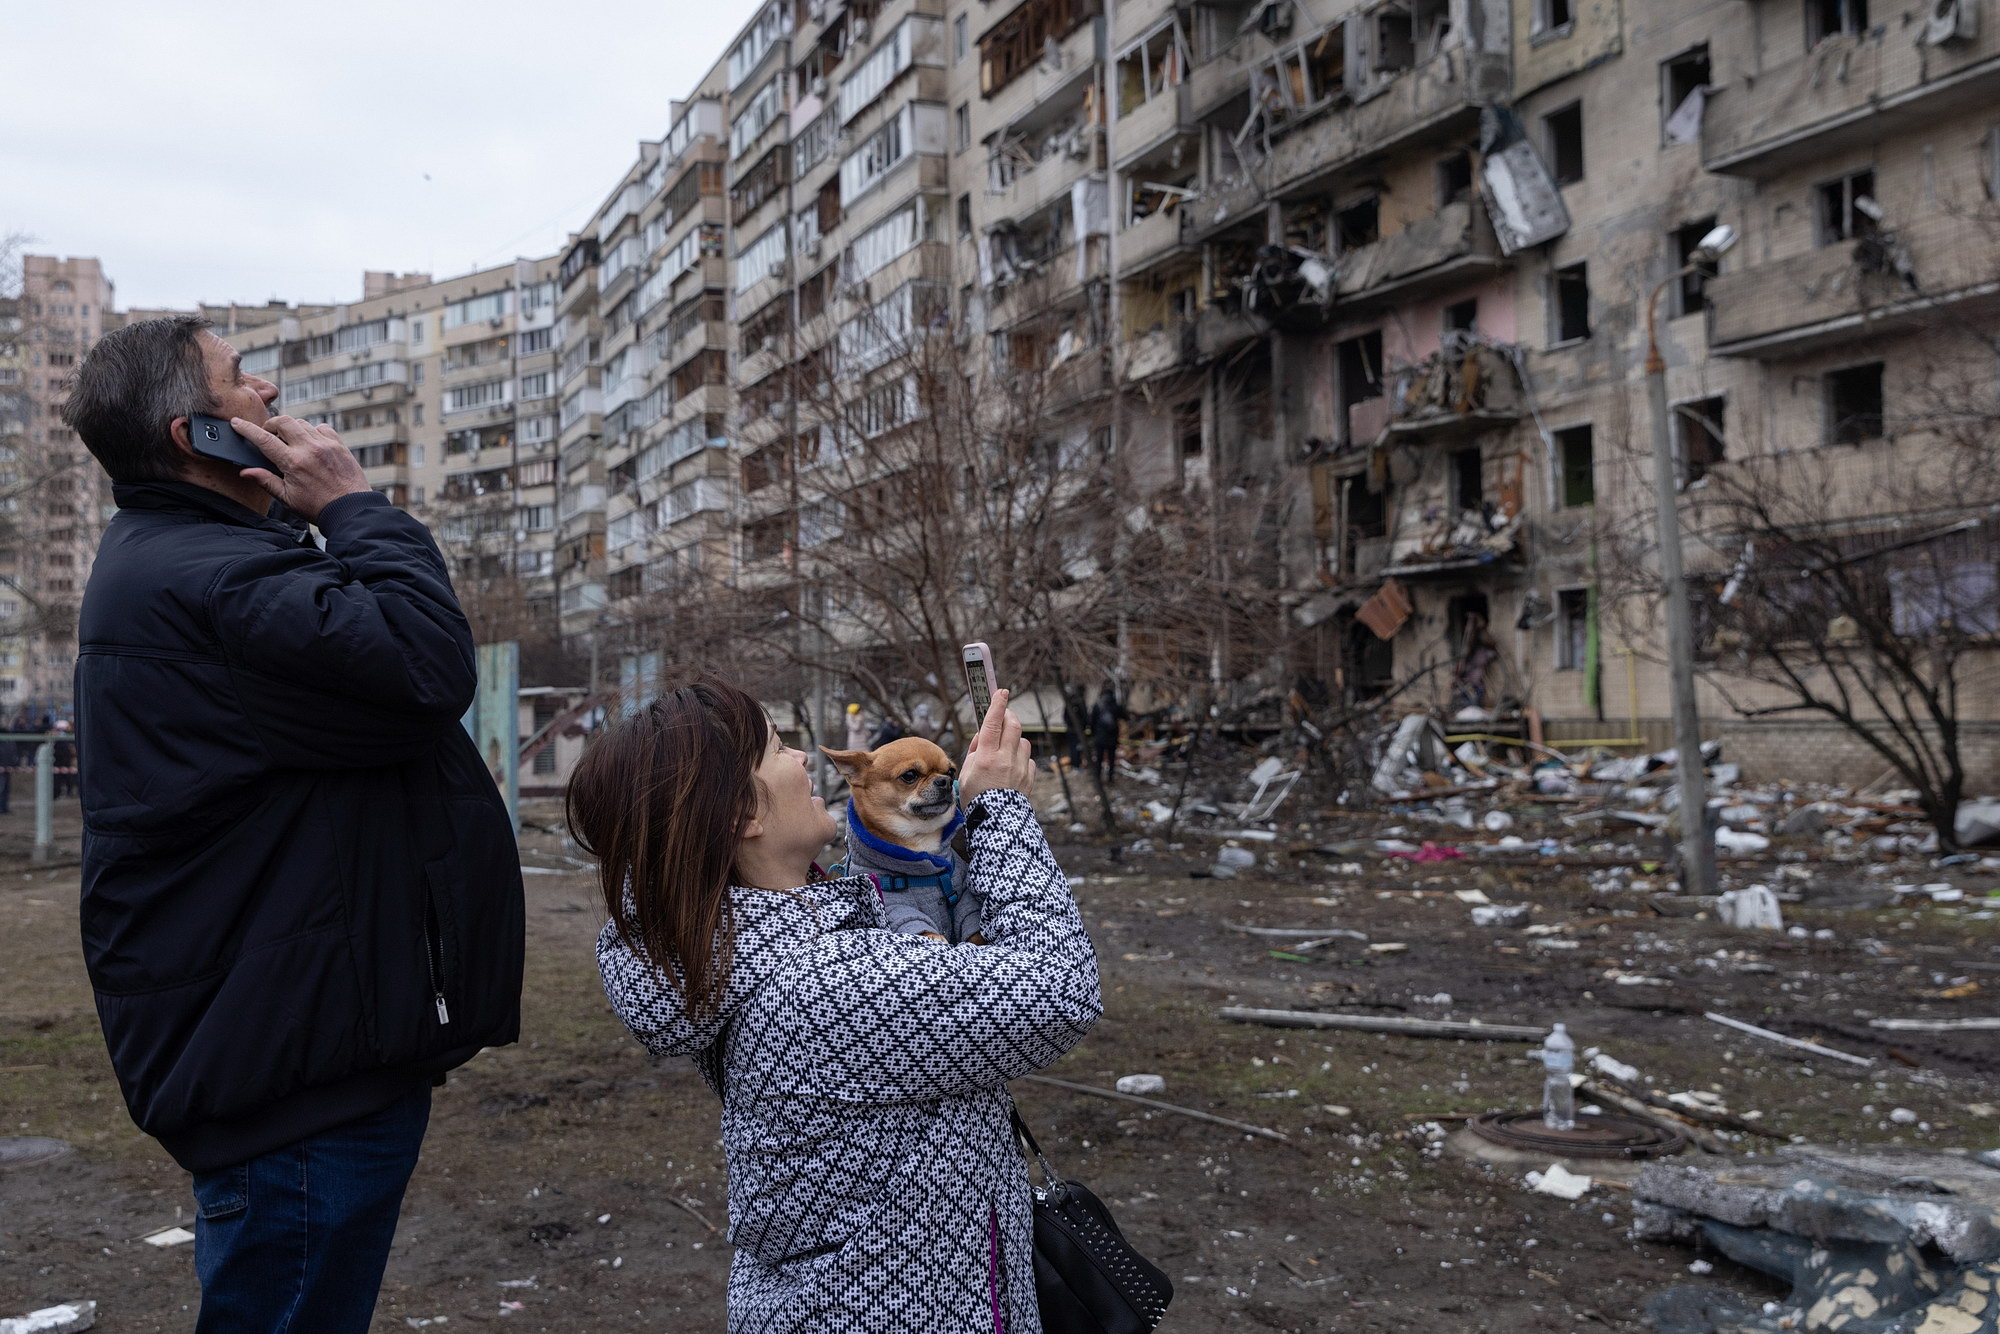 Andriy Guck: No-fly zone is what Ukraine urgently needs to save civilians and cities